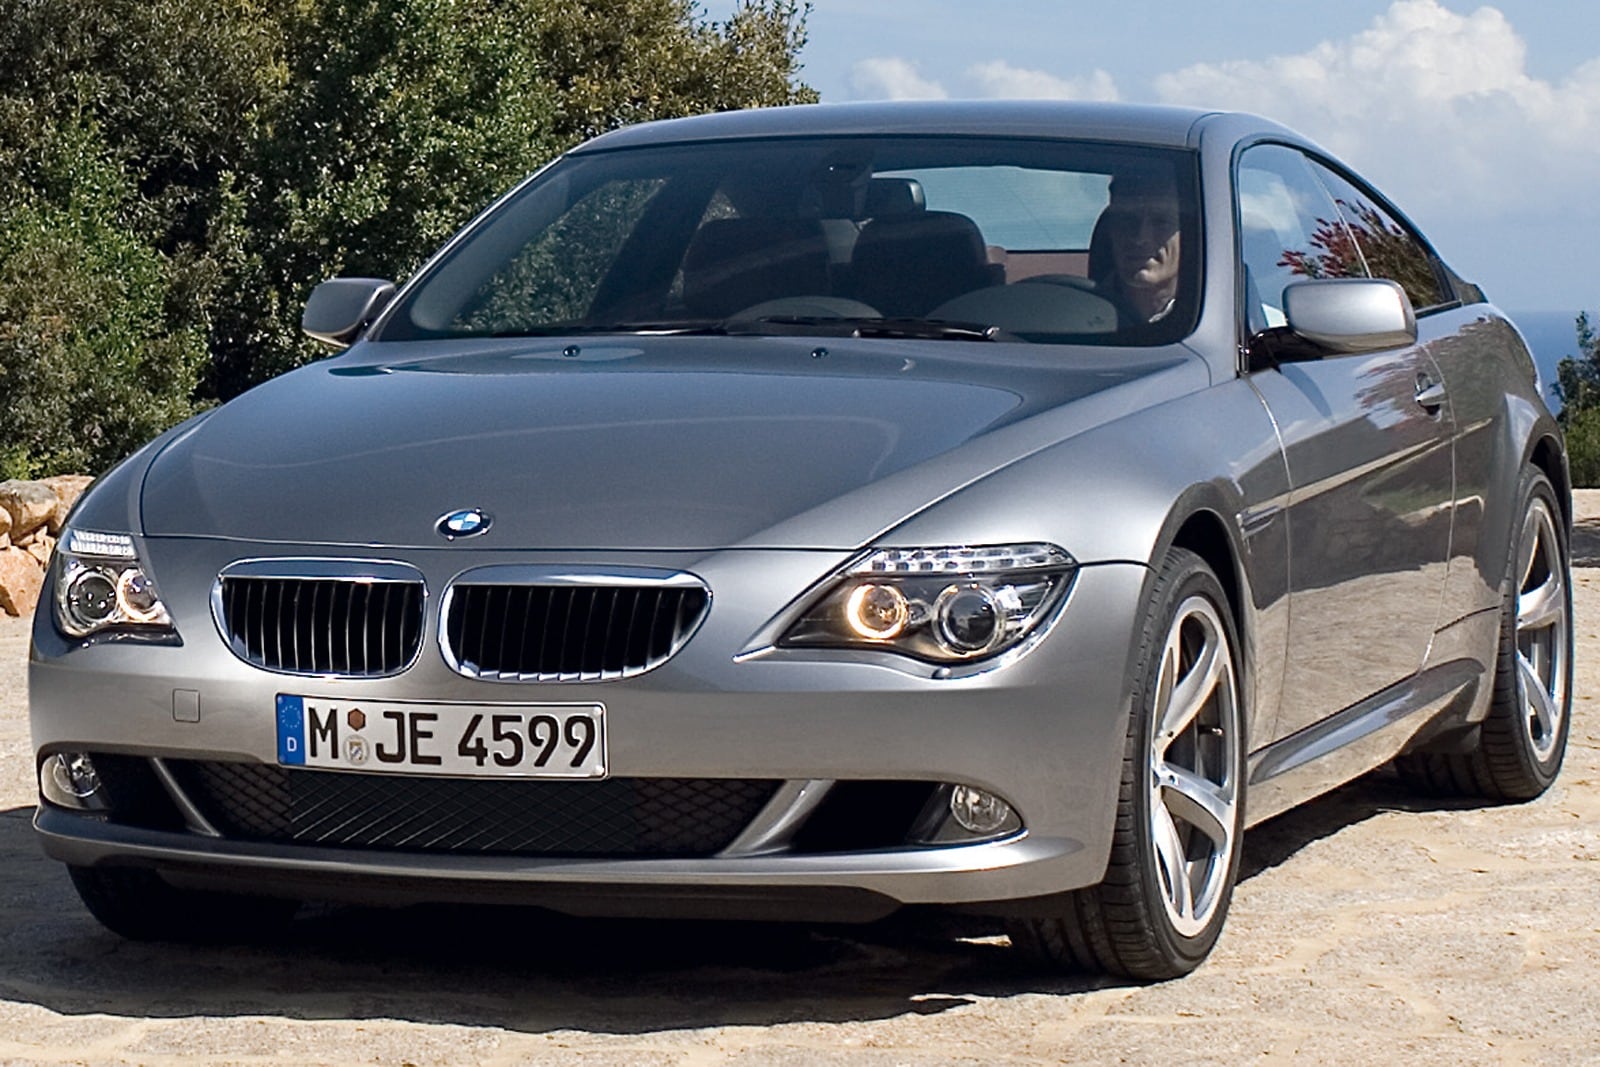 Used 2008 BMW 6 Series Coupe Review | Edmunds